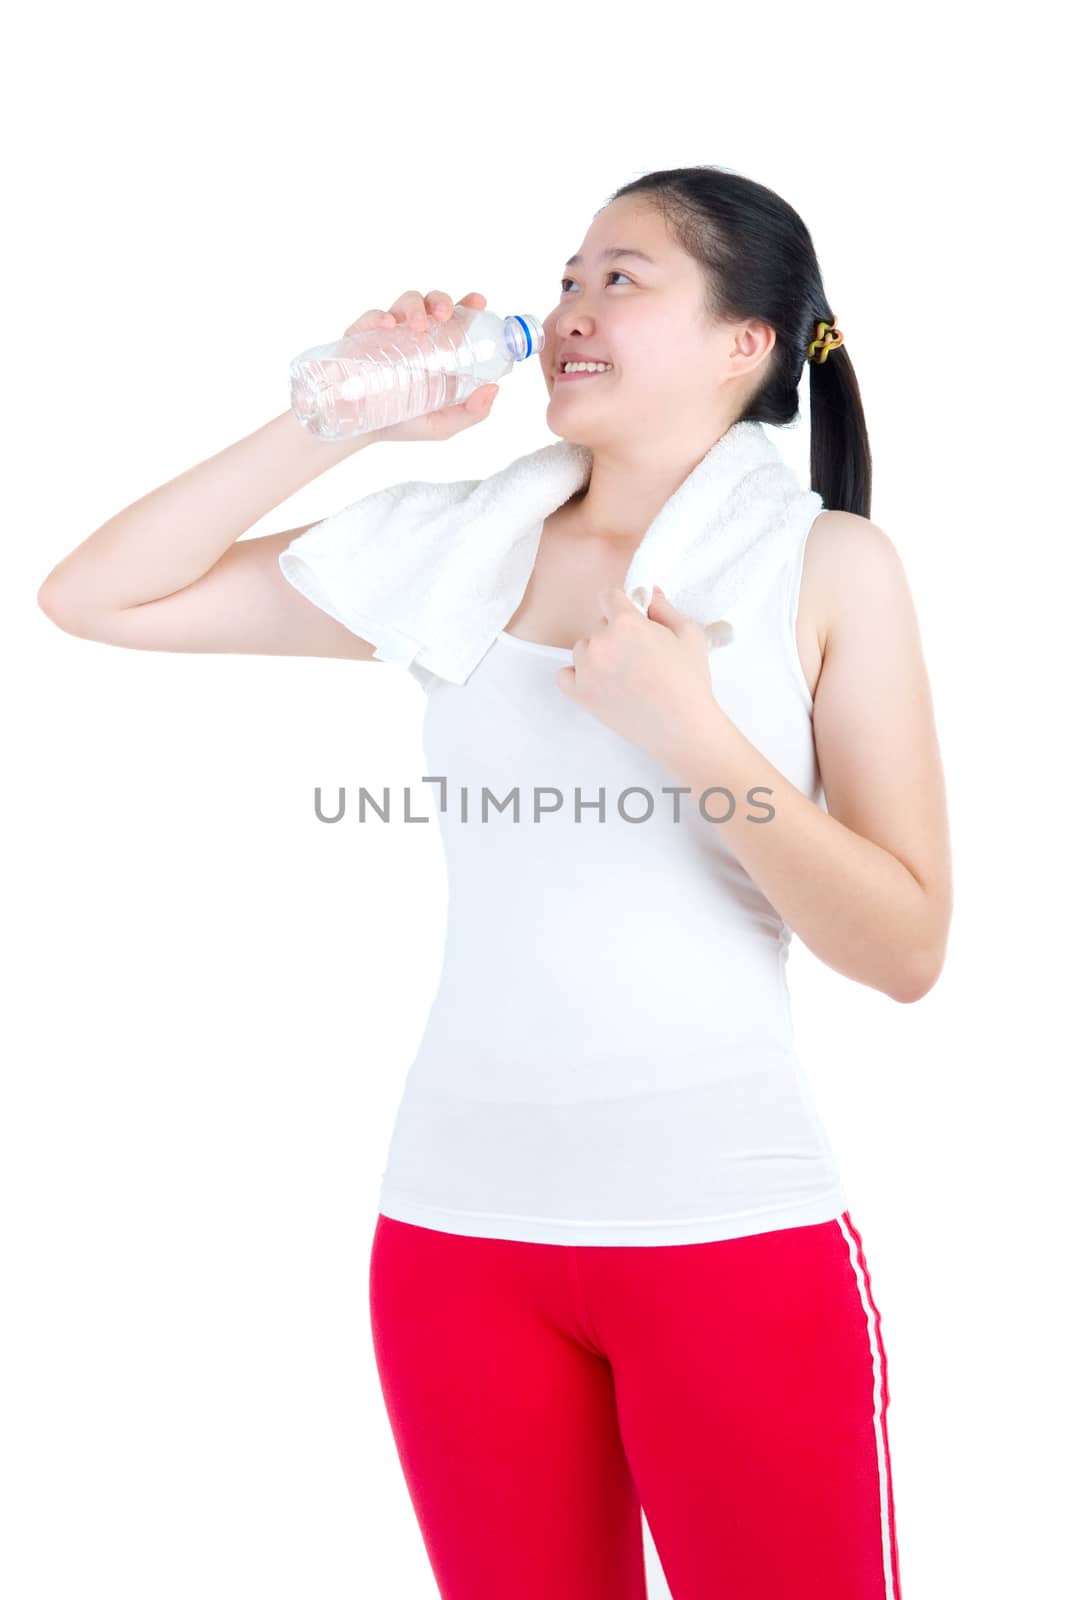 sport woman drinking water with towel